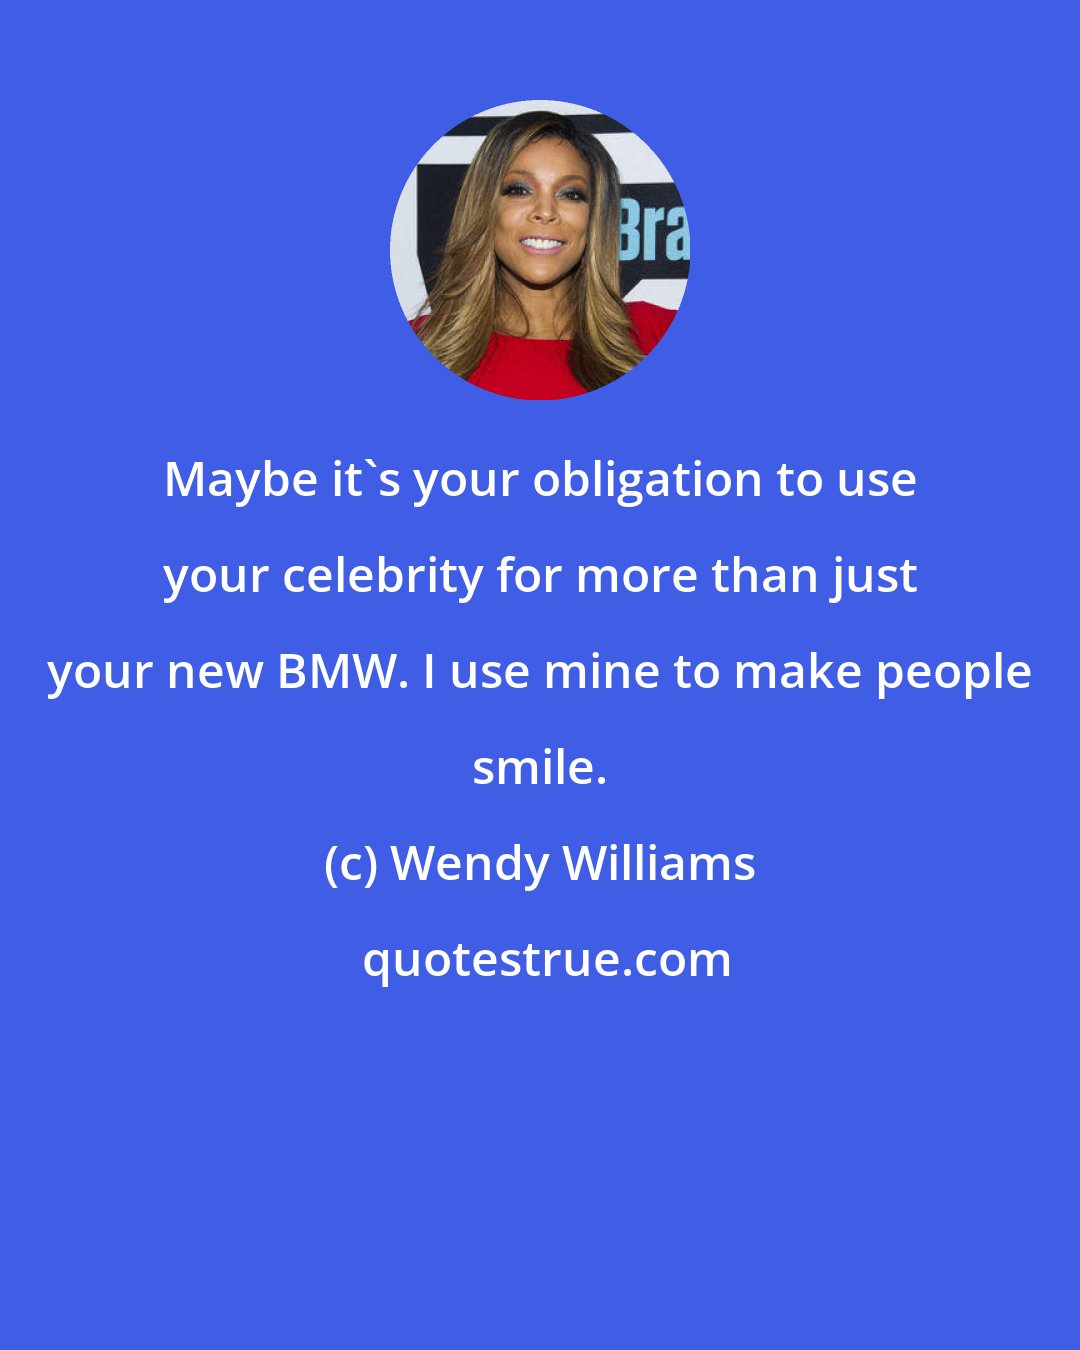 Wendy Williams: Maybe it's your obligation to use your celebrity for more than just your new BMW. I use mine to make people smile.